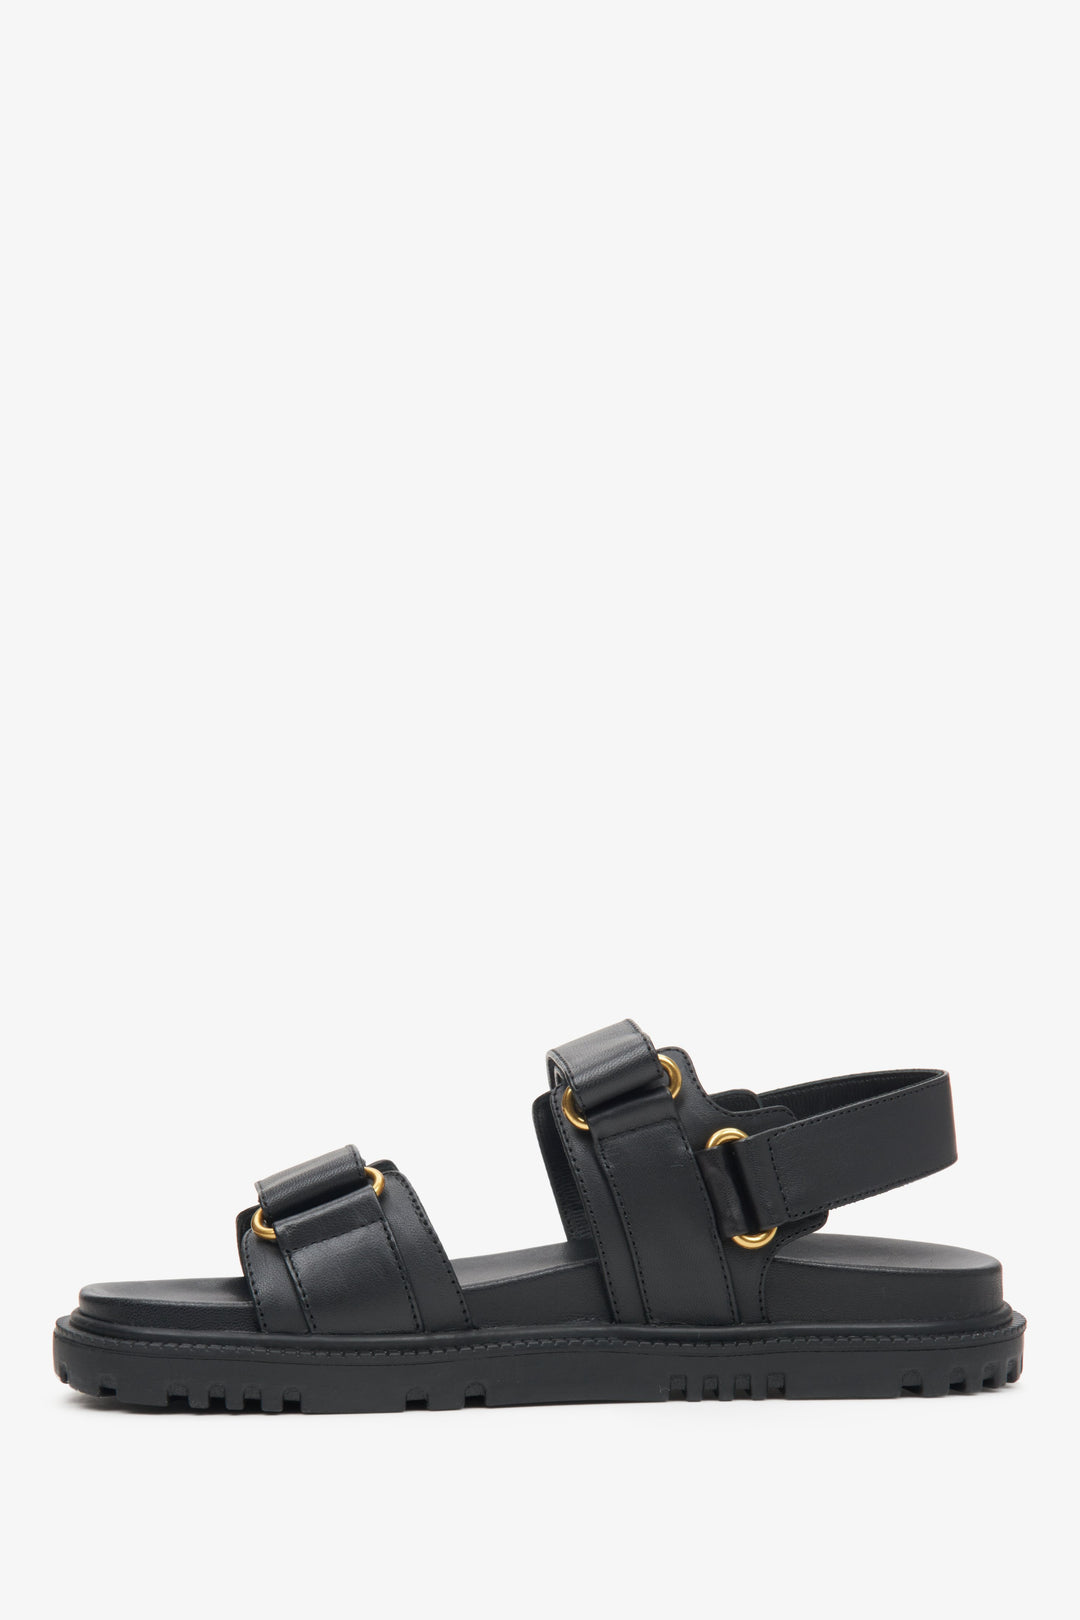 Estro women's black  leather sandals with a flexible sole and golden accents.